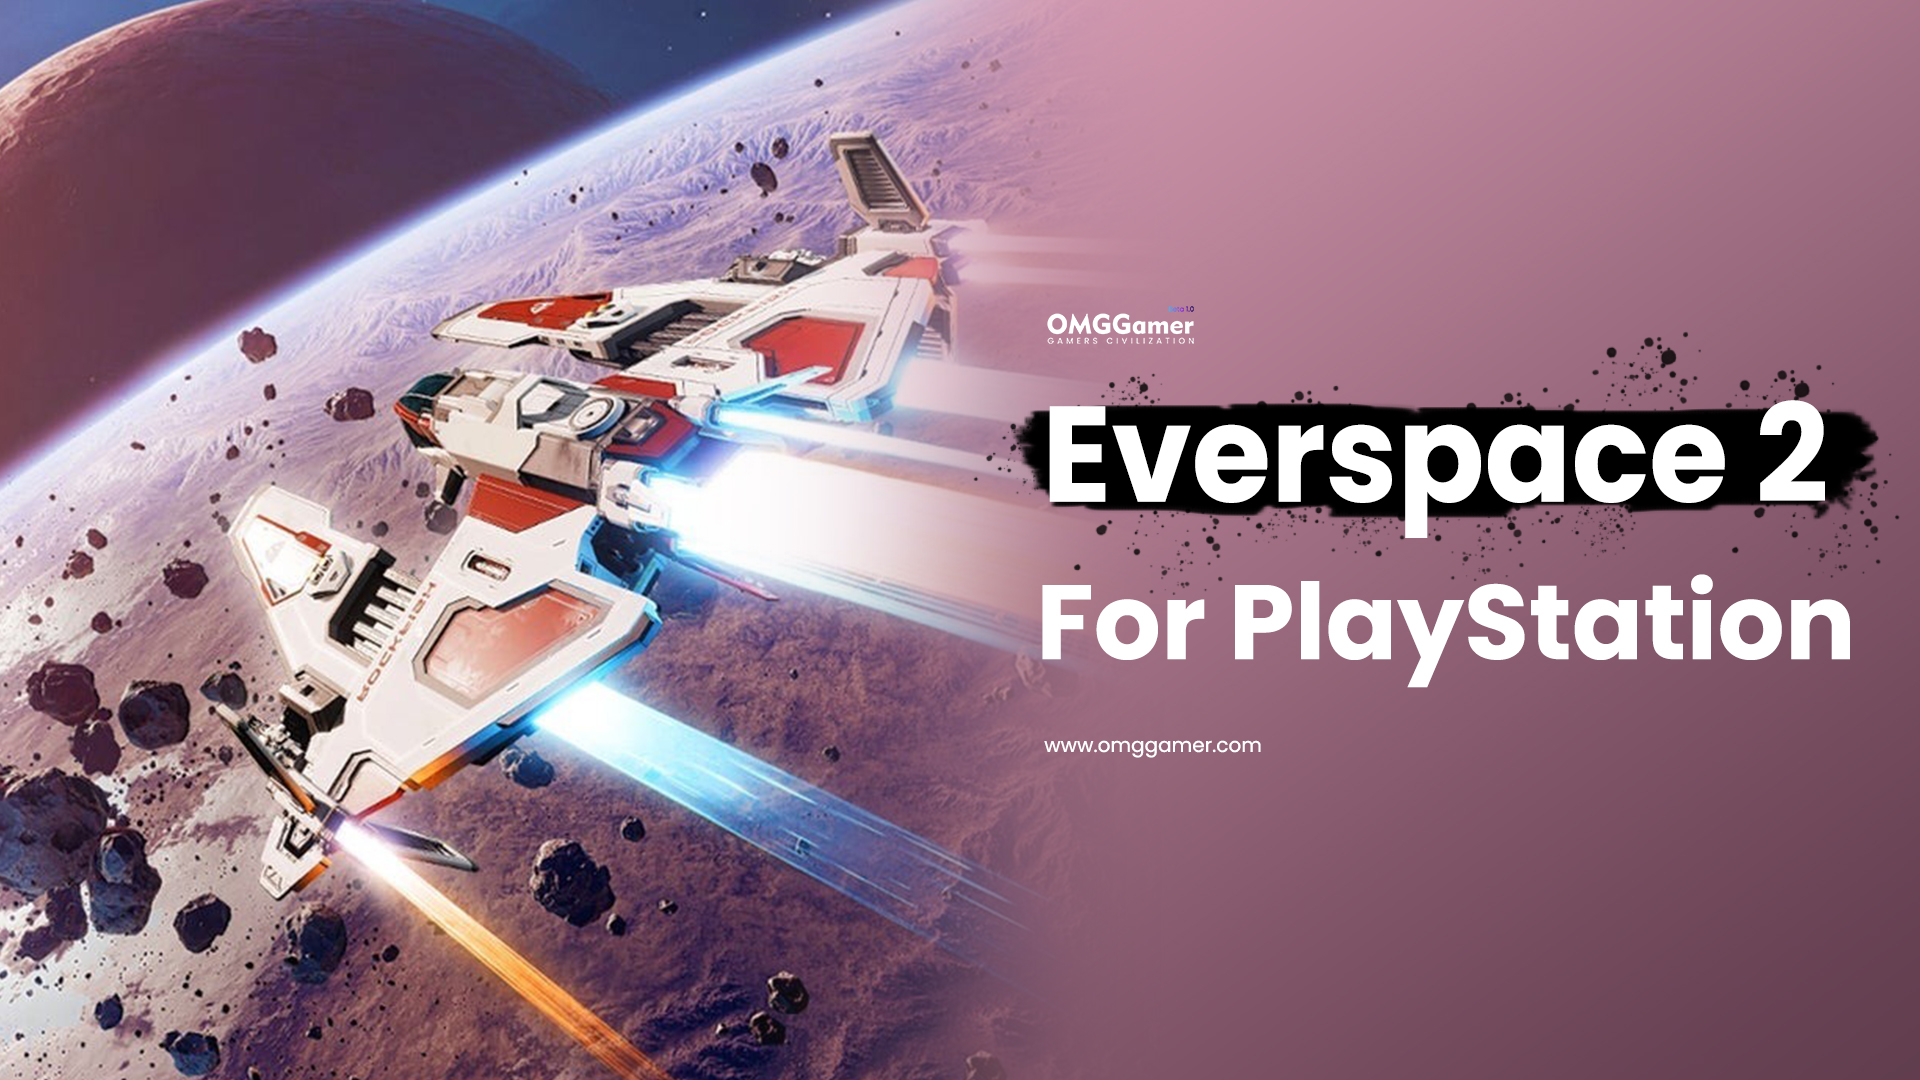 Everspace 2 for PlayStation